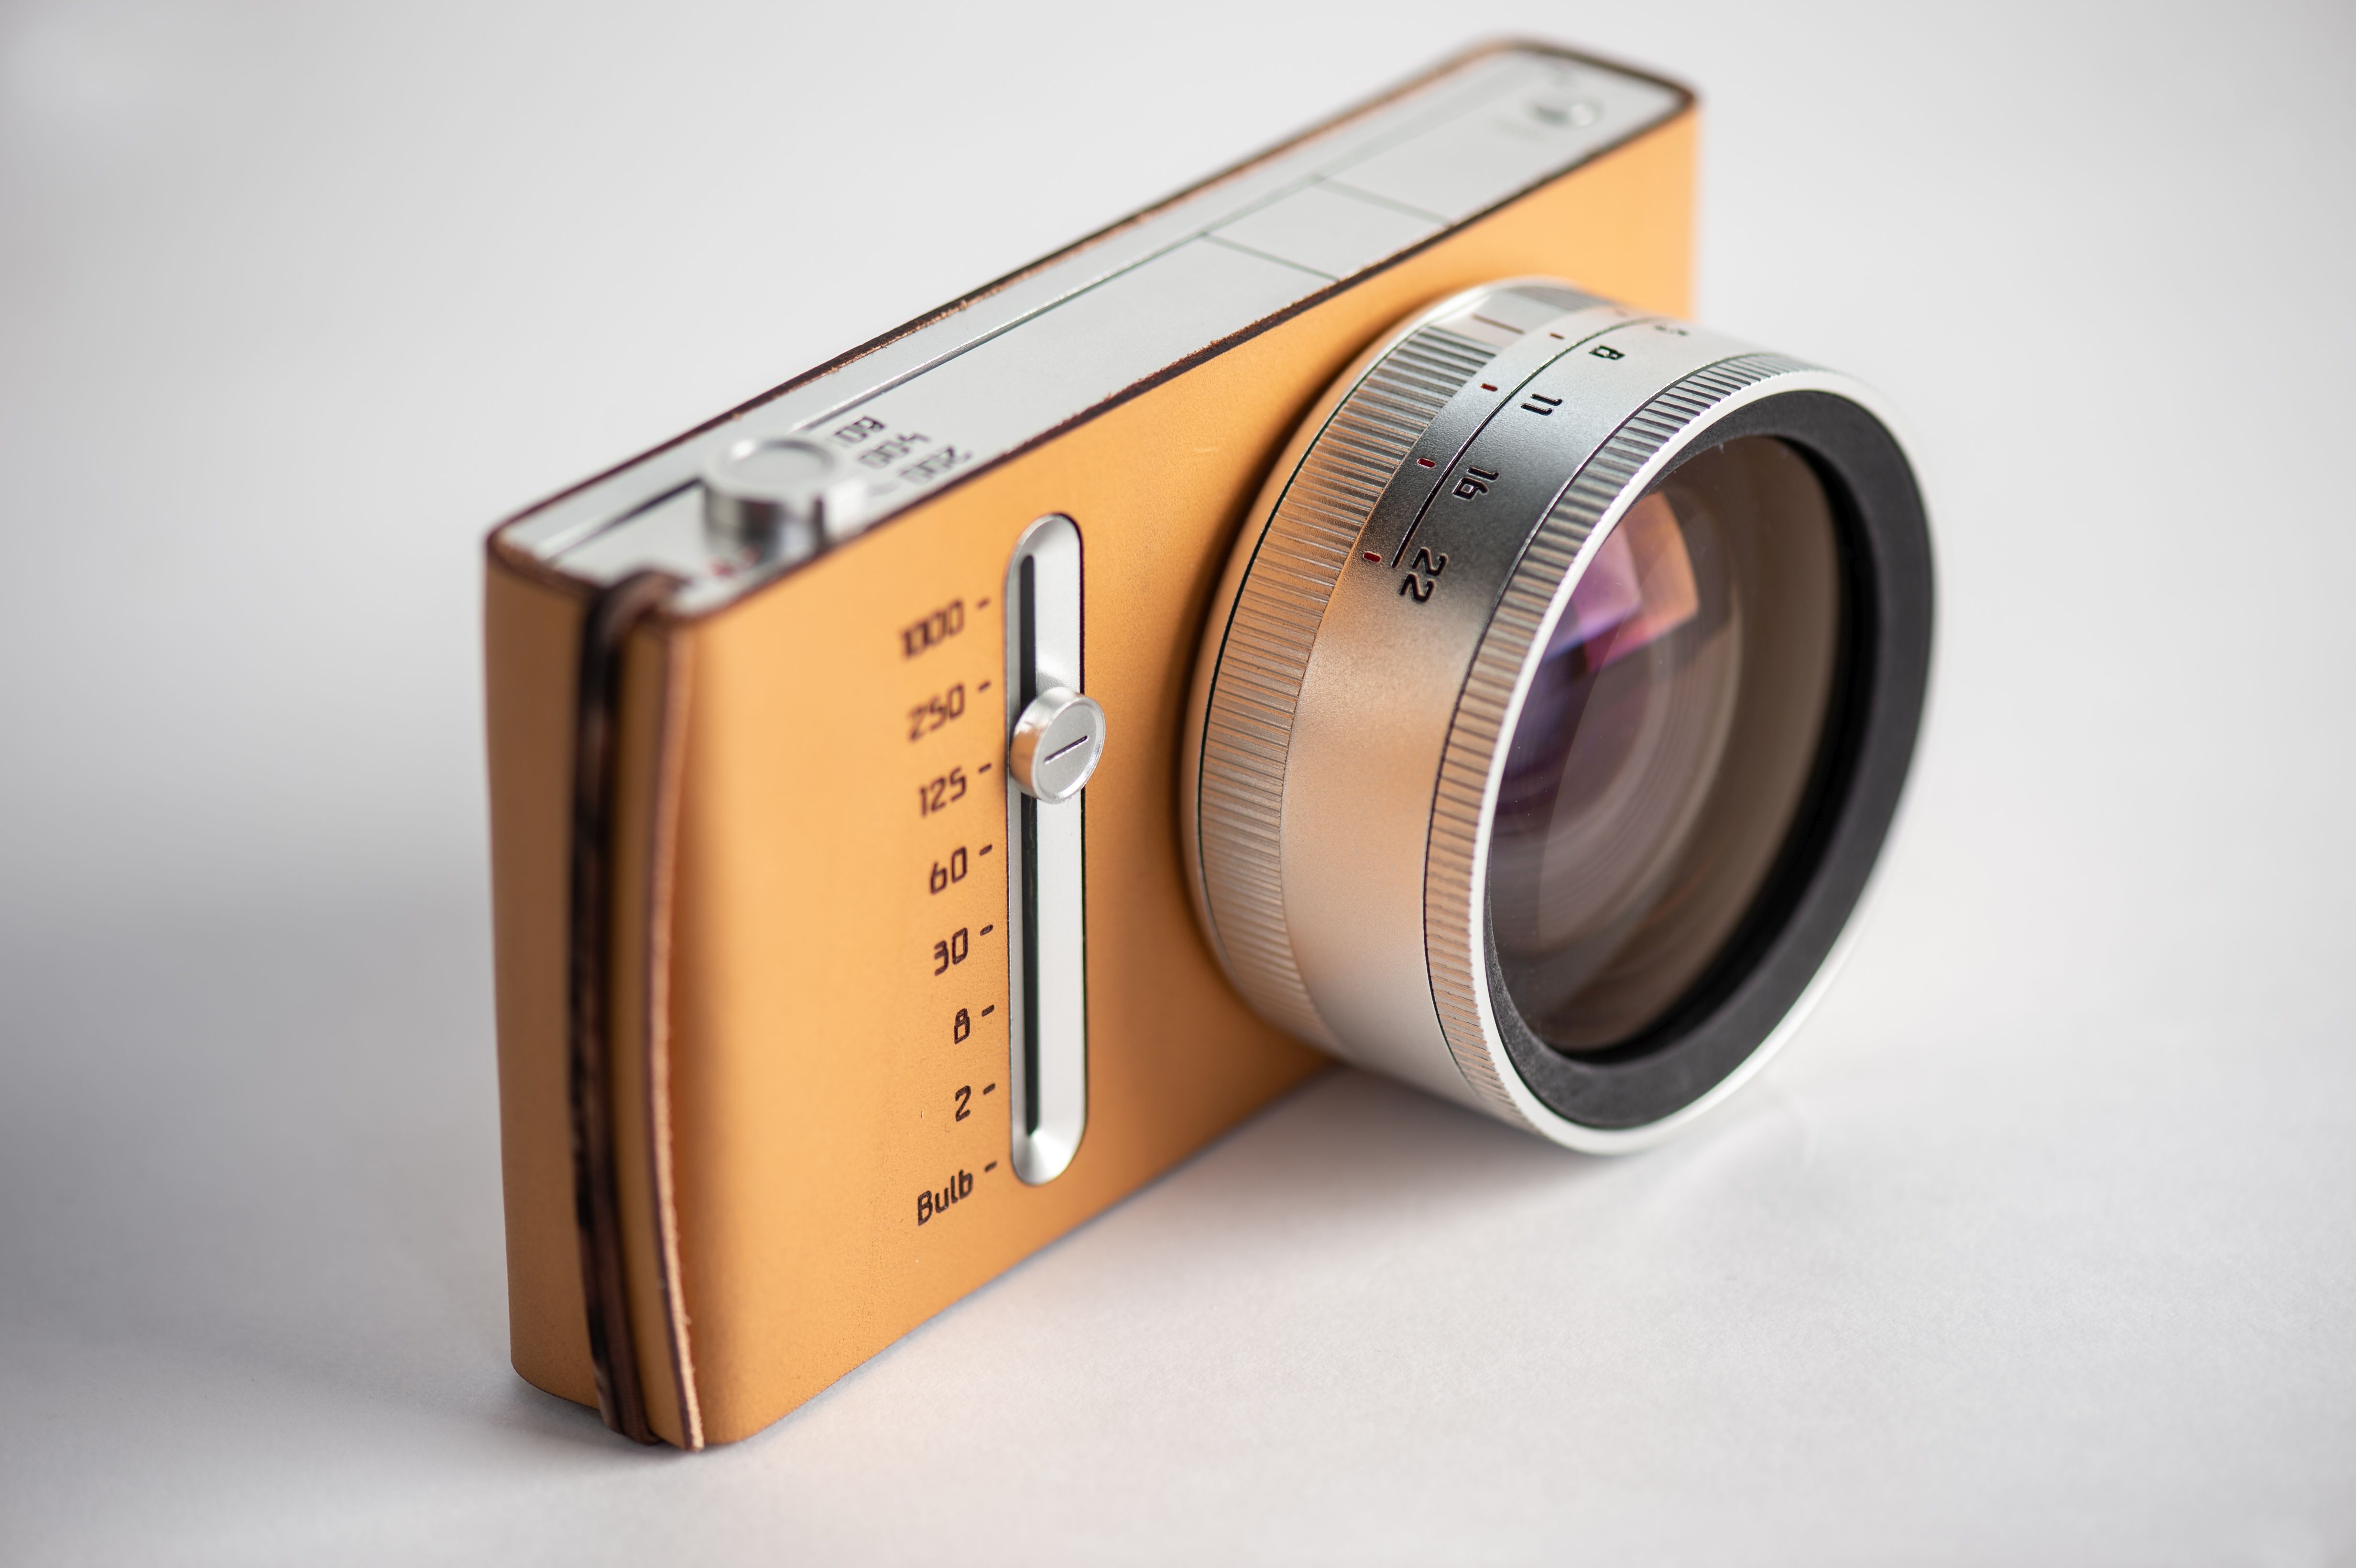 Note - a camera designed for those with a visual impairment - created by Rob Chapman